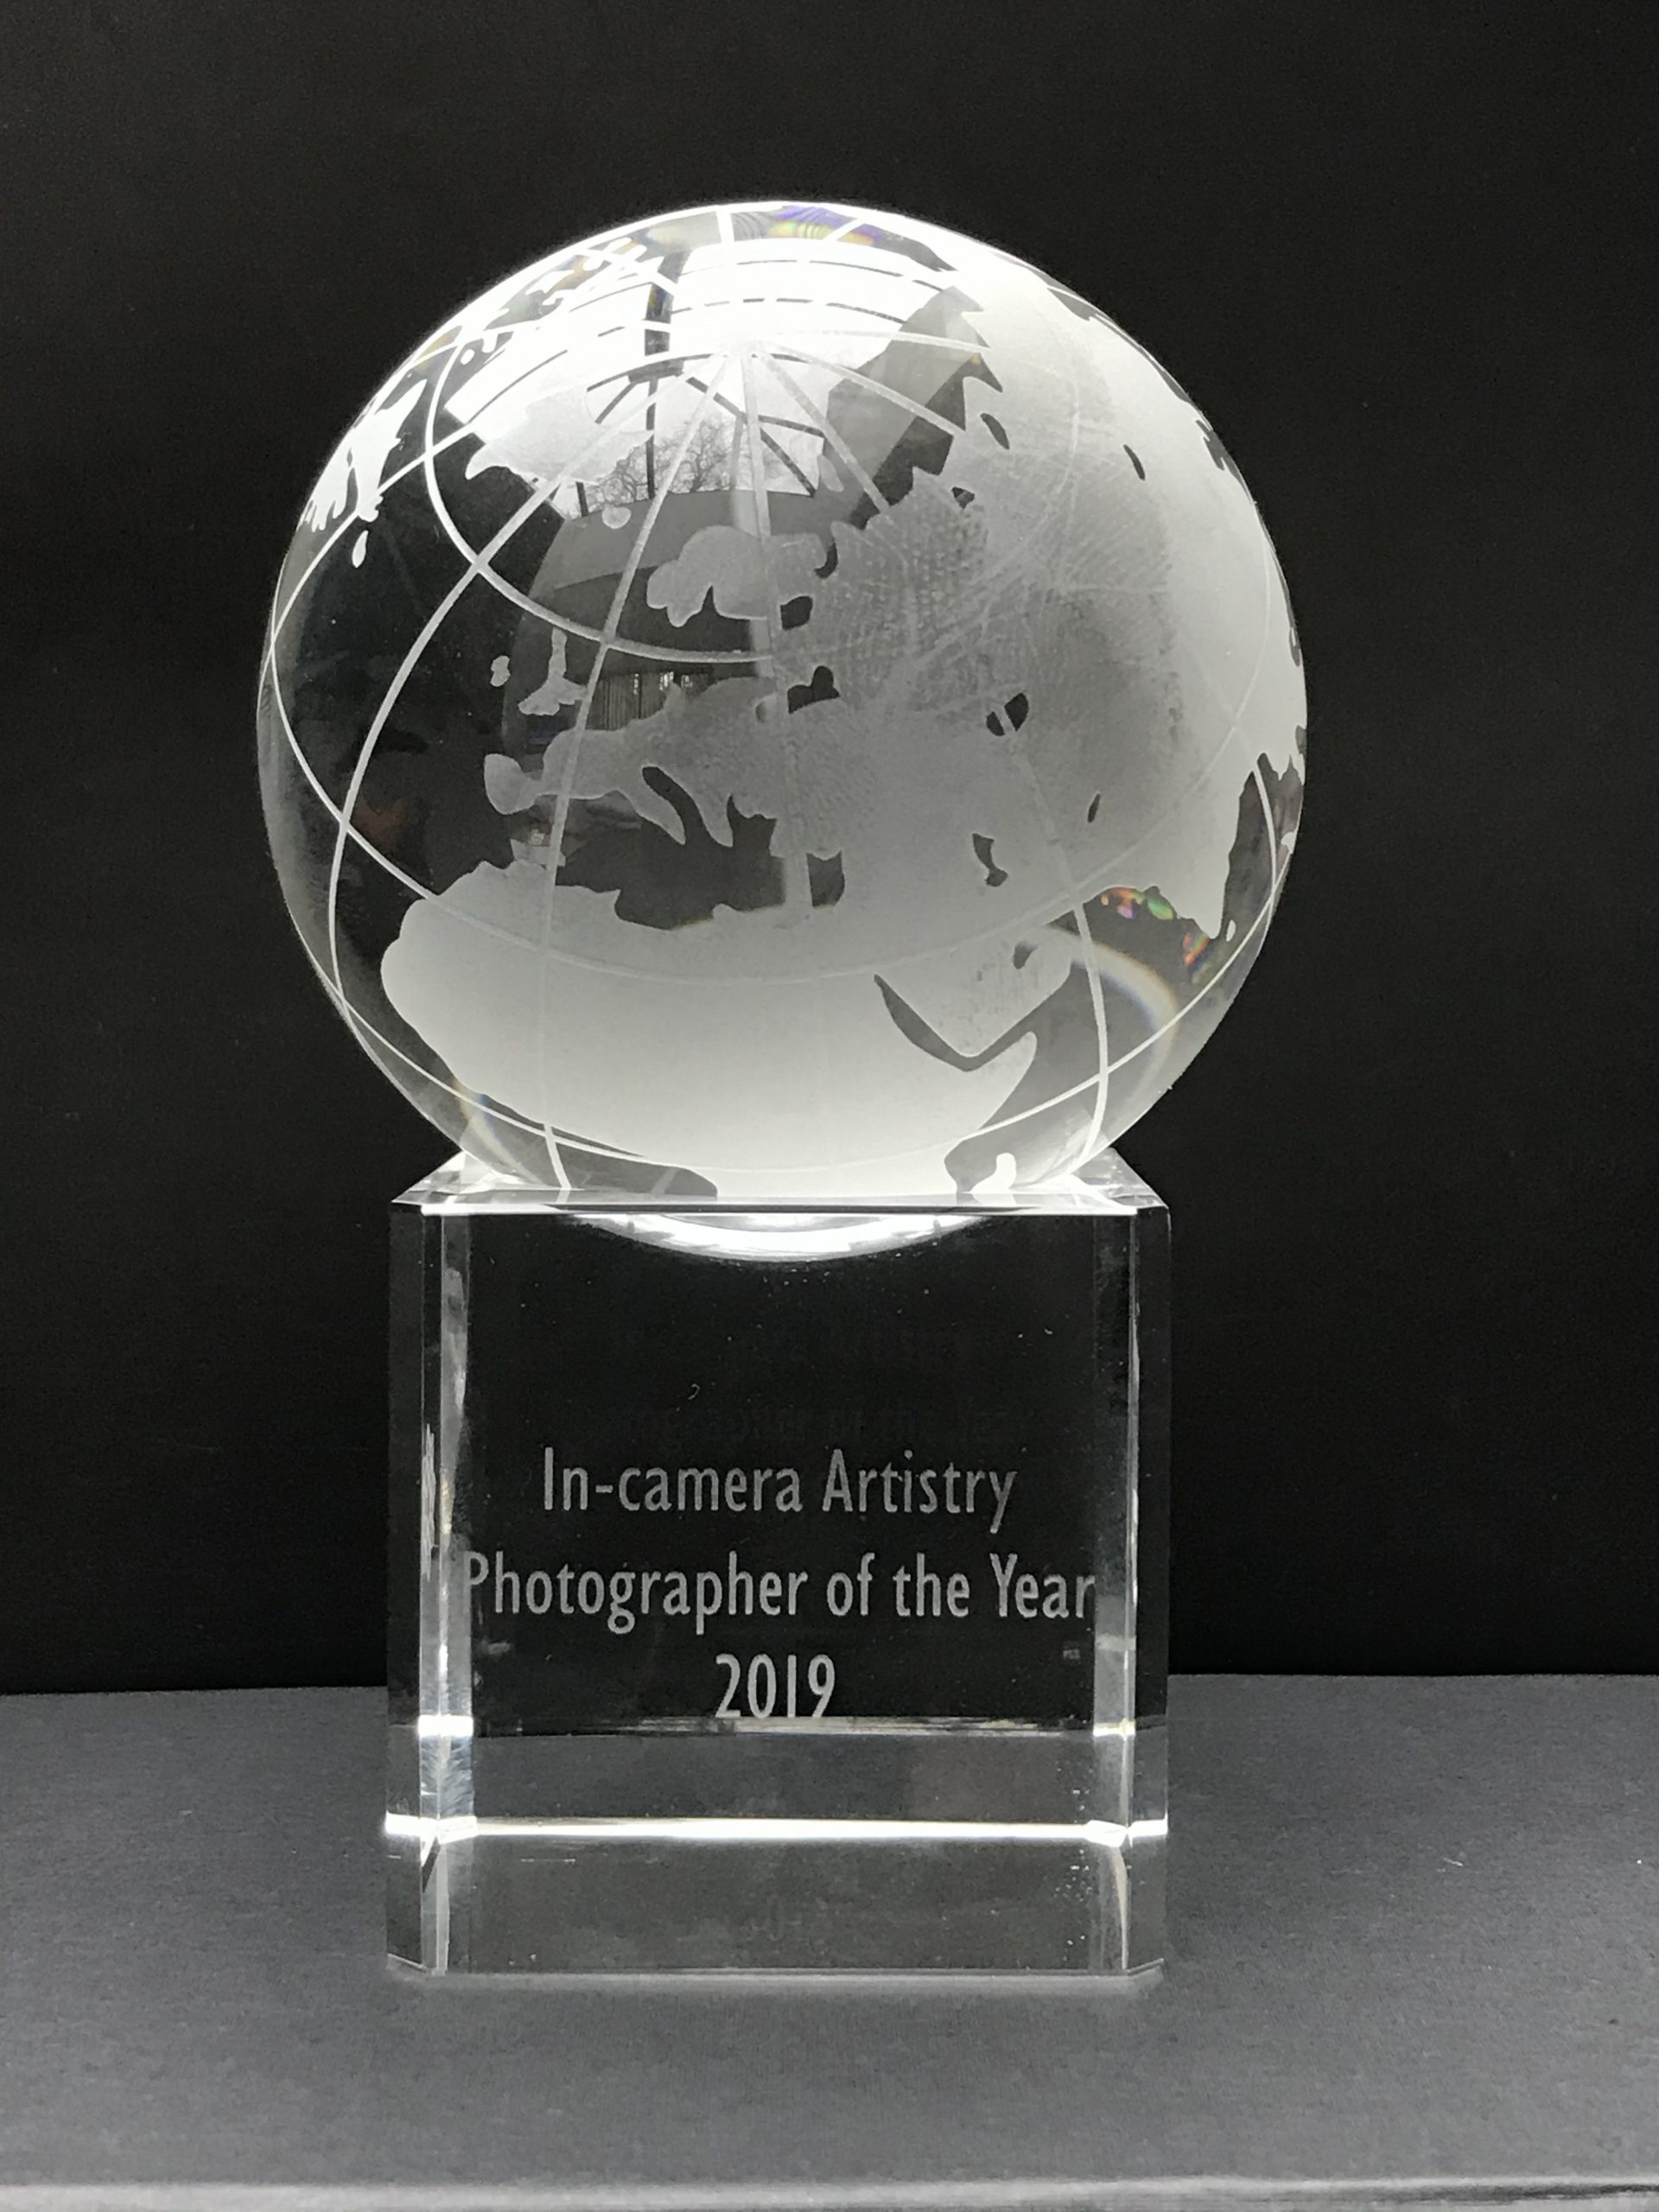 In Camera Artistry award from the SWPP rotating engraved globe on glass stand